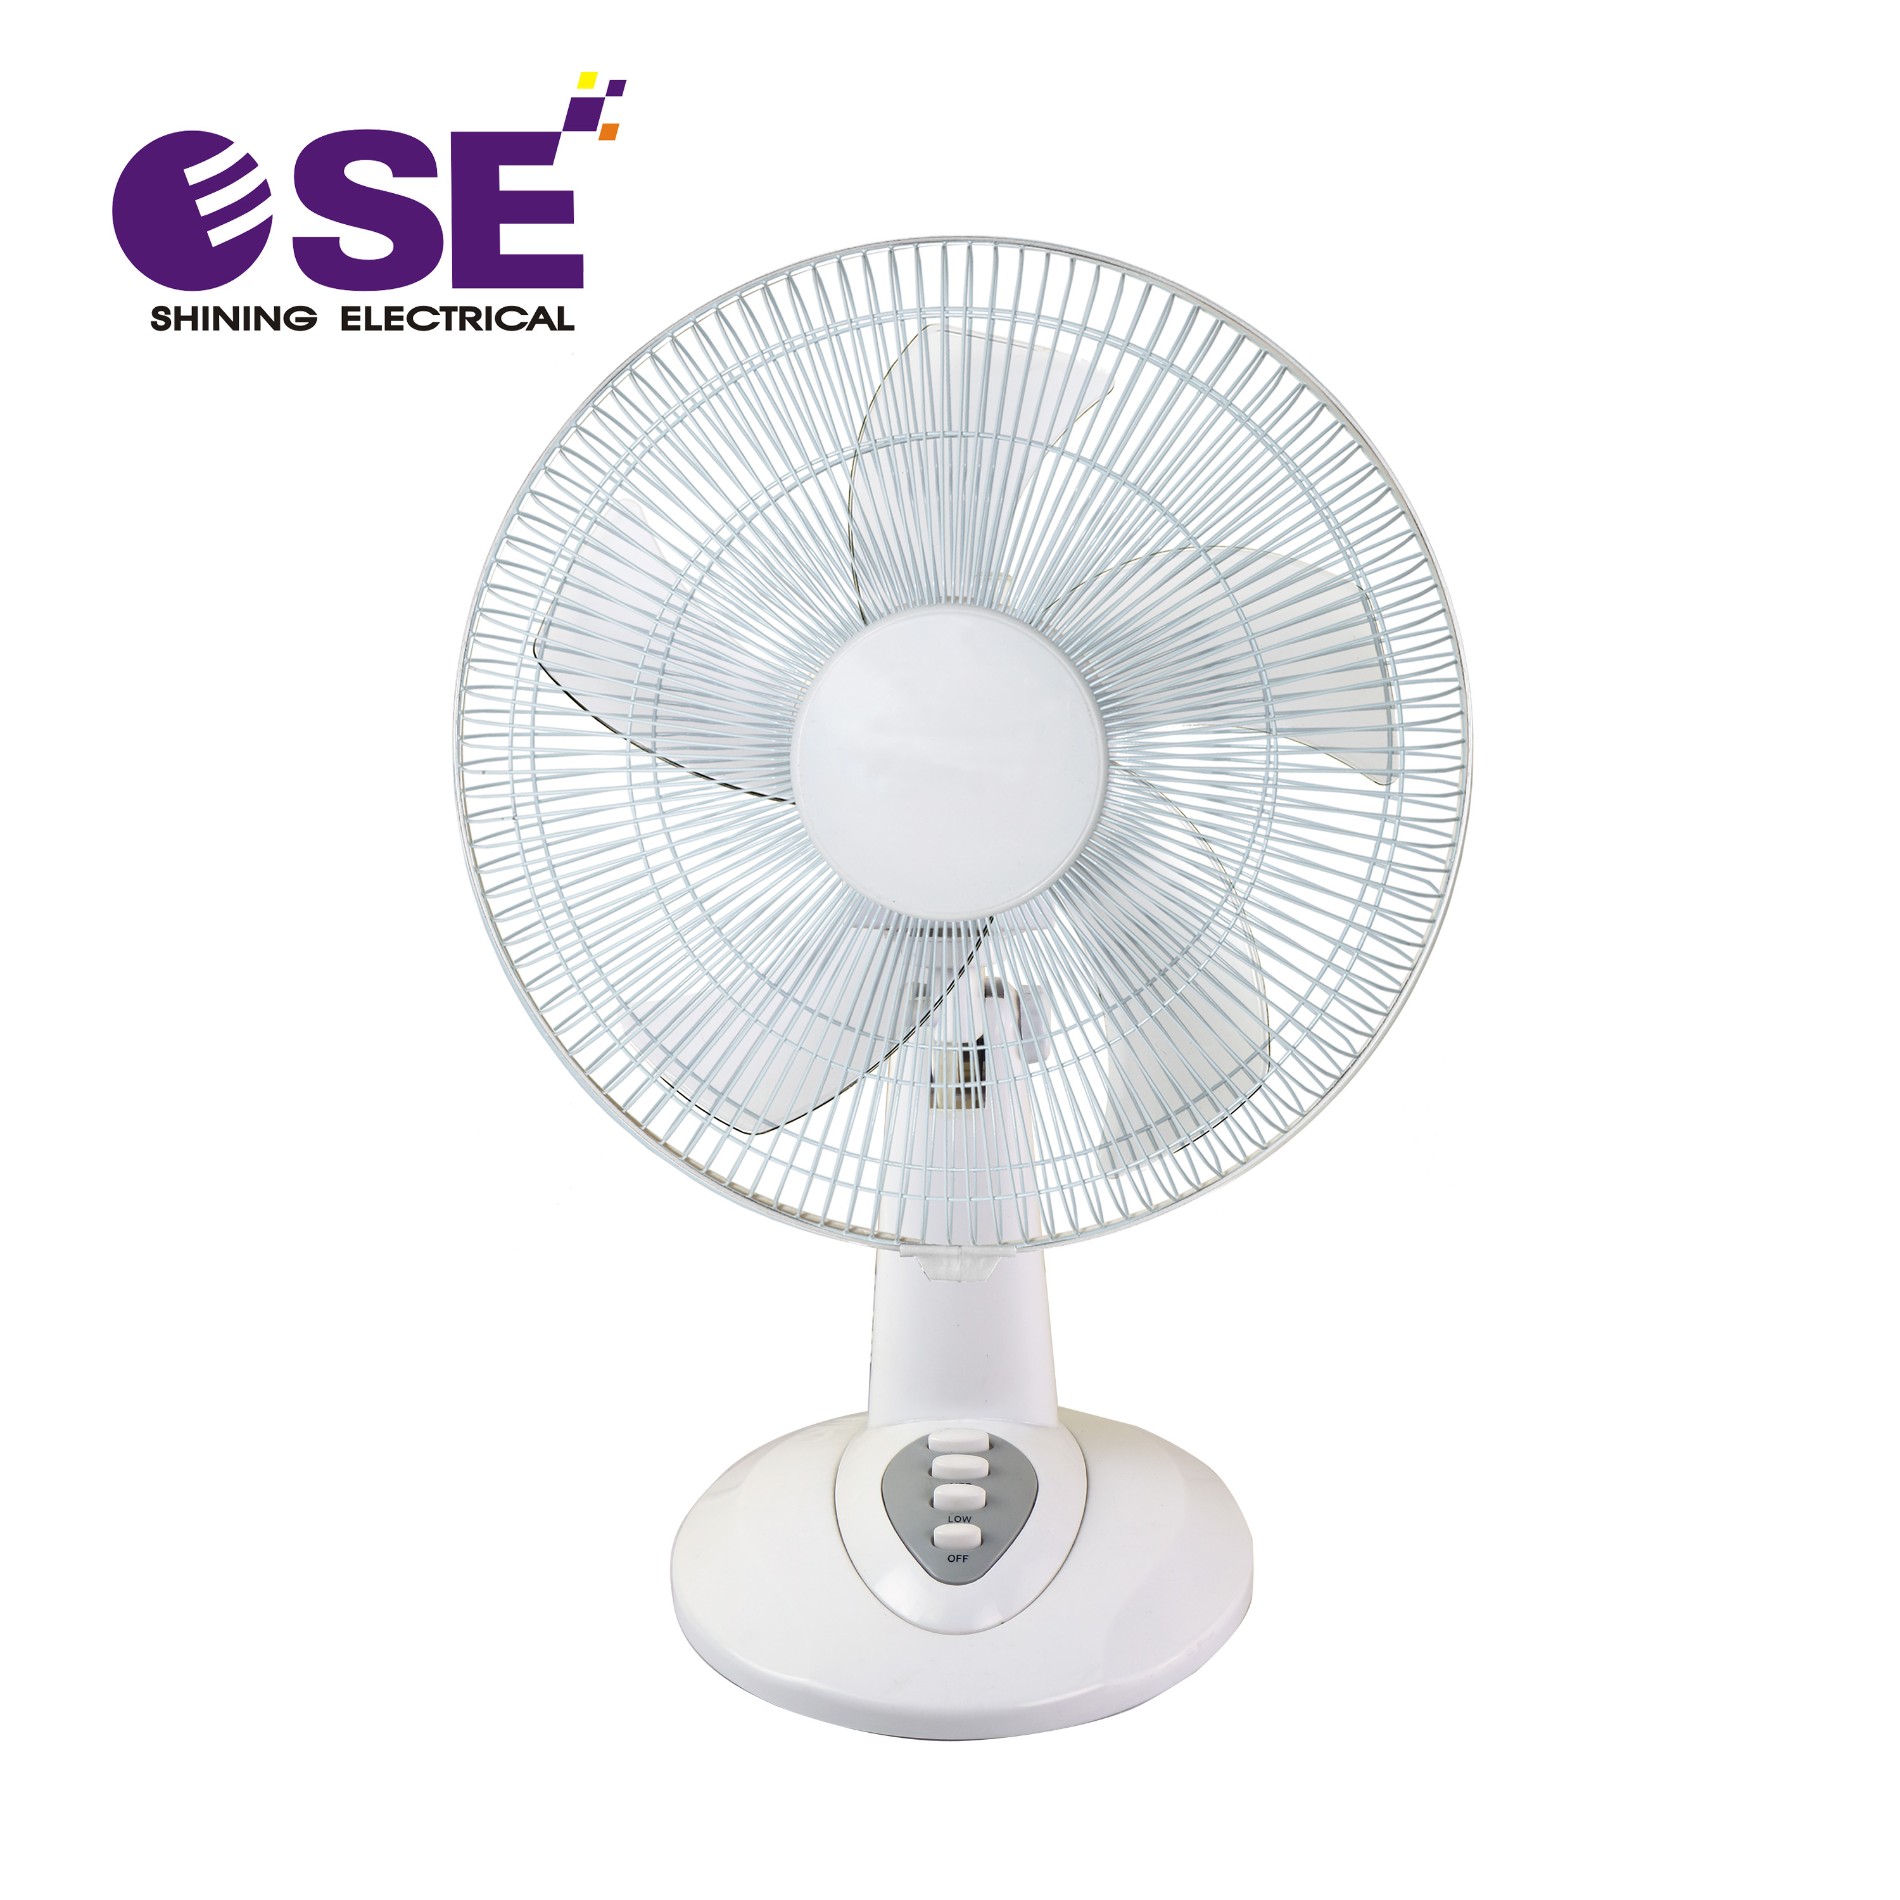 Pagguhit ng Silid Gumamit ng Cooper Motor 16 Inch Desk Type Electric Fan